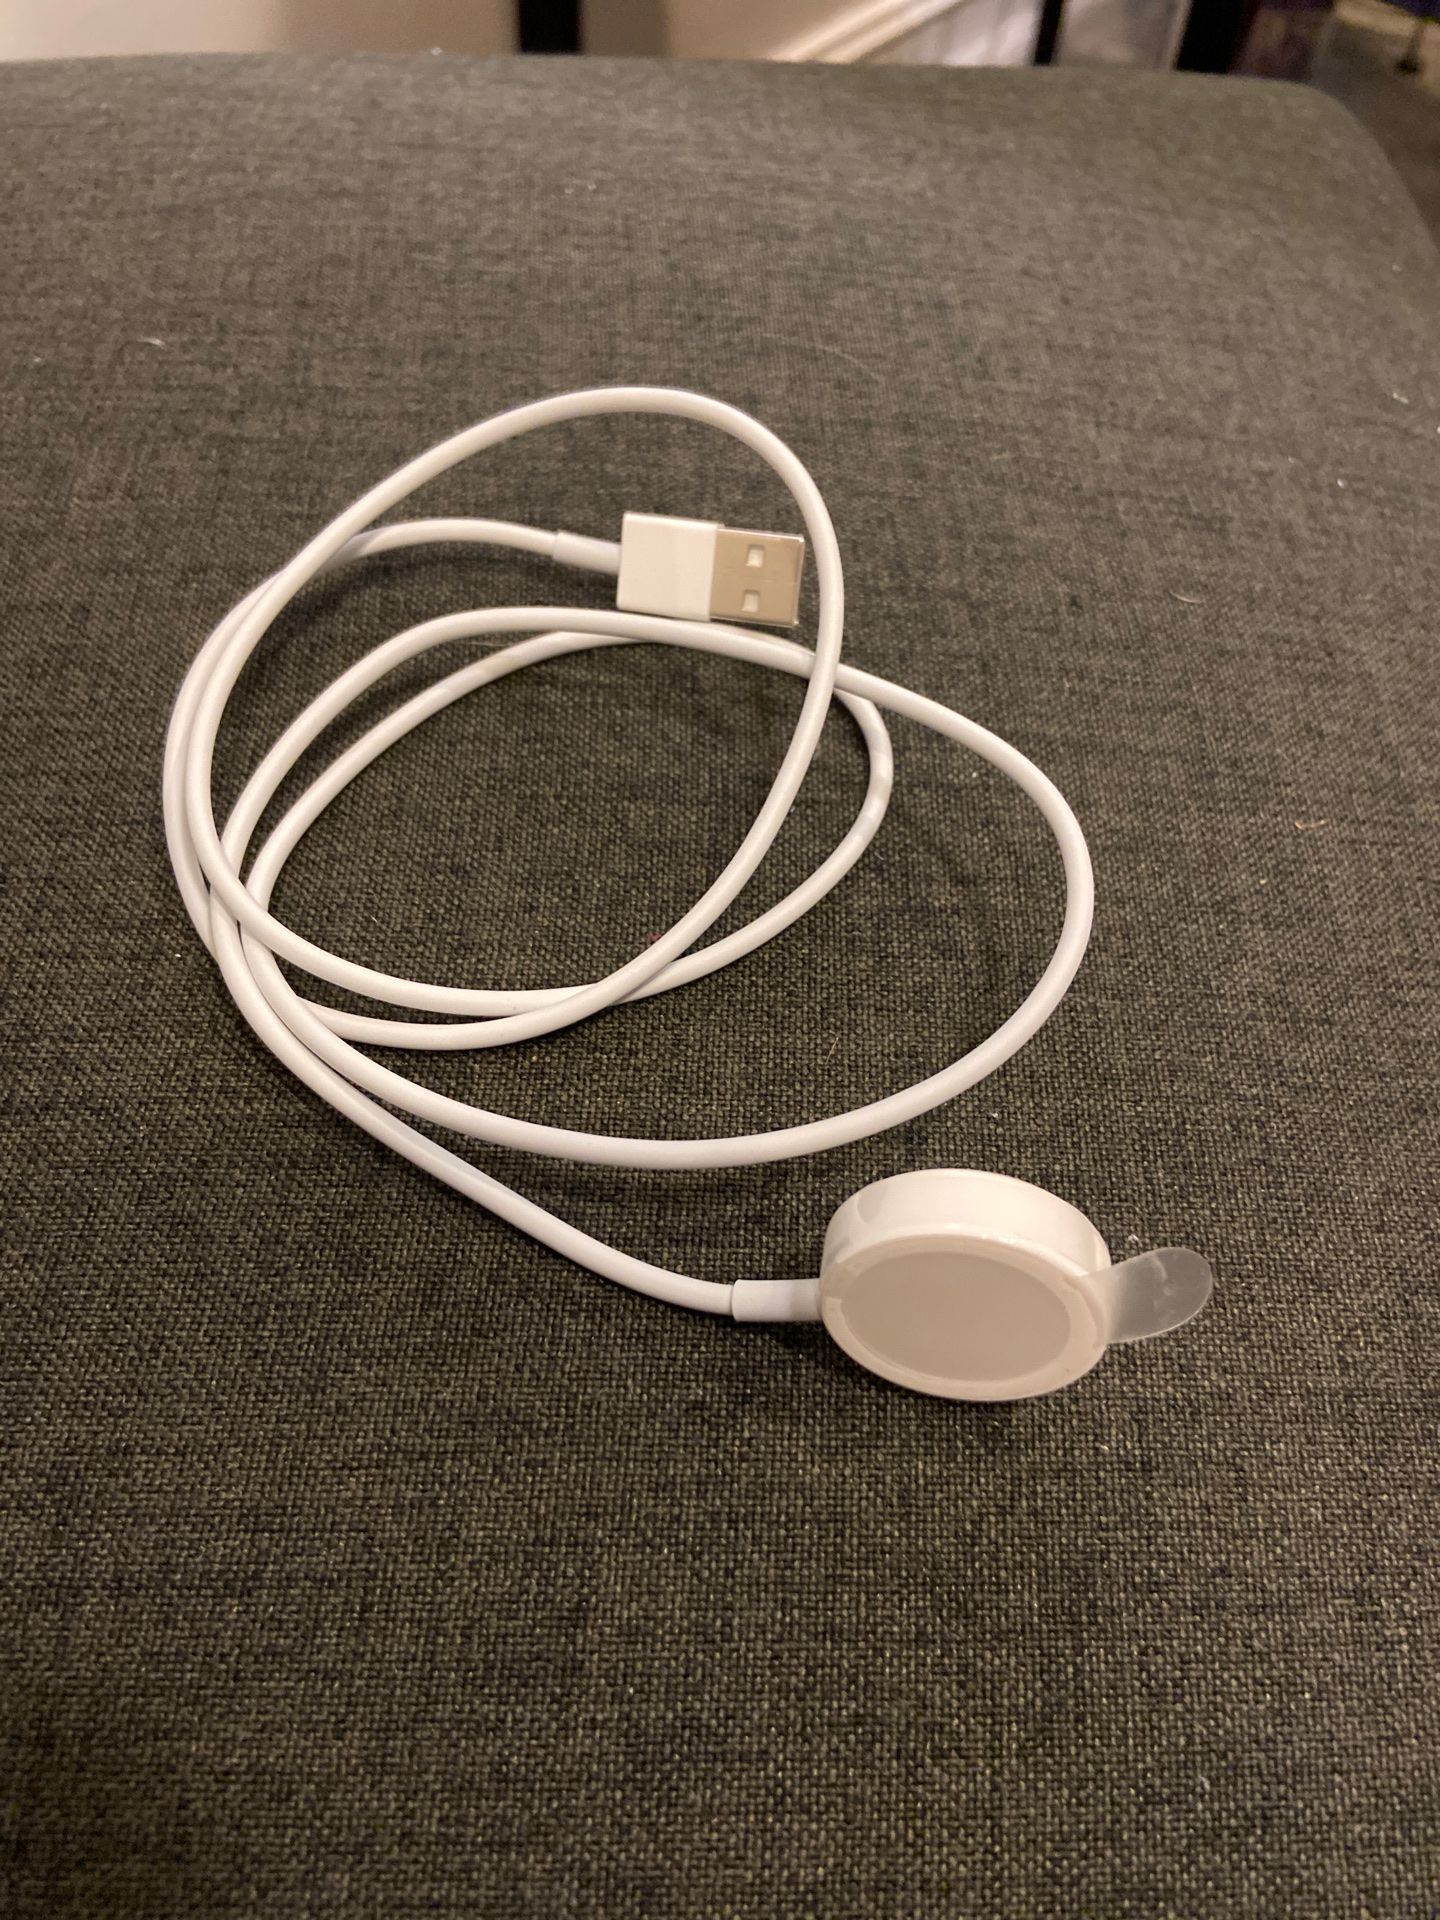 Apple Iwatch Charger brand new (series 3)